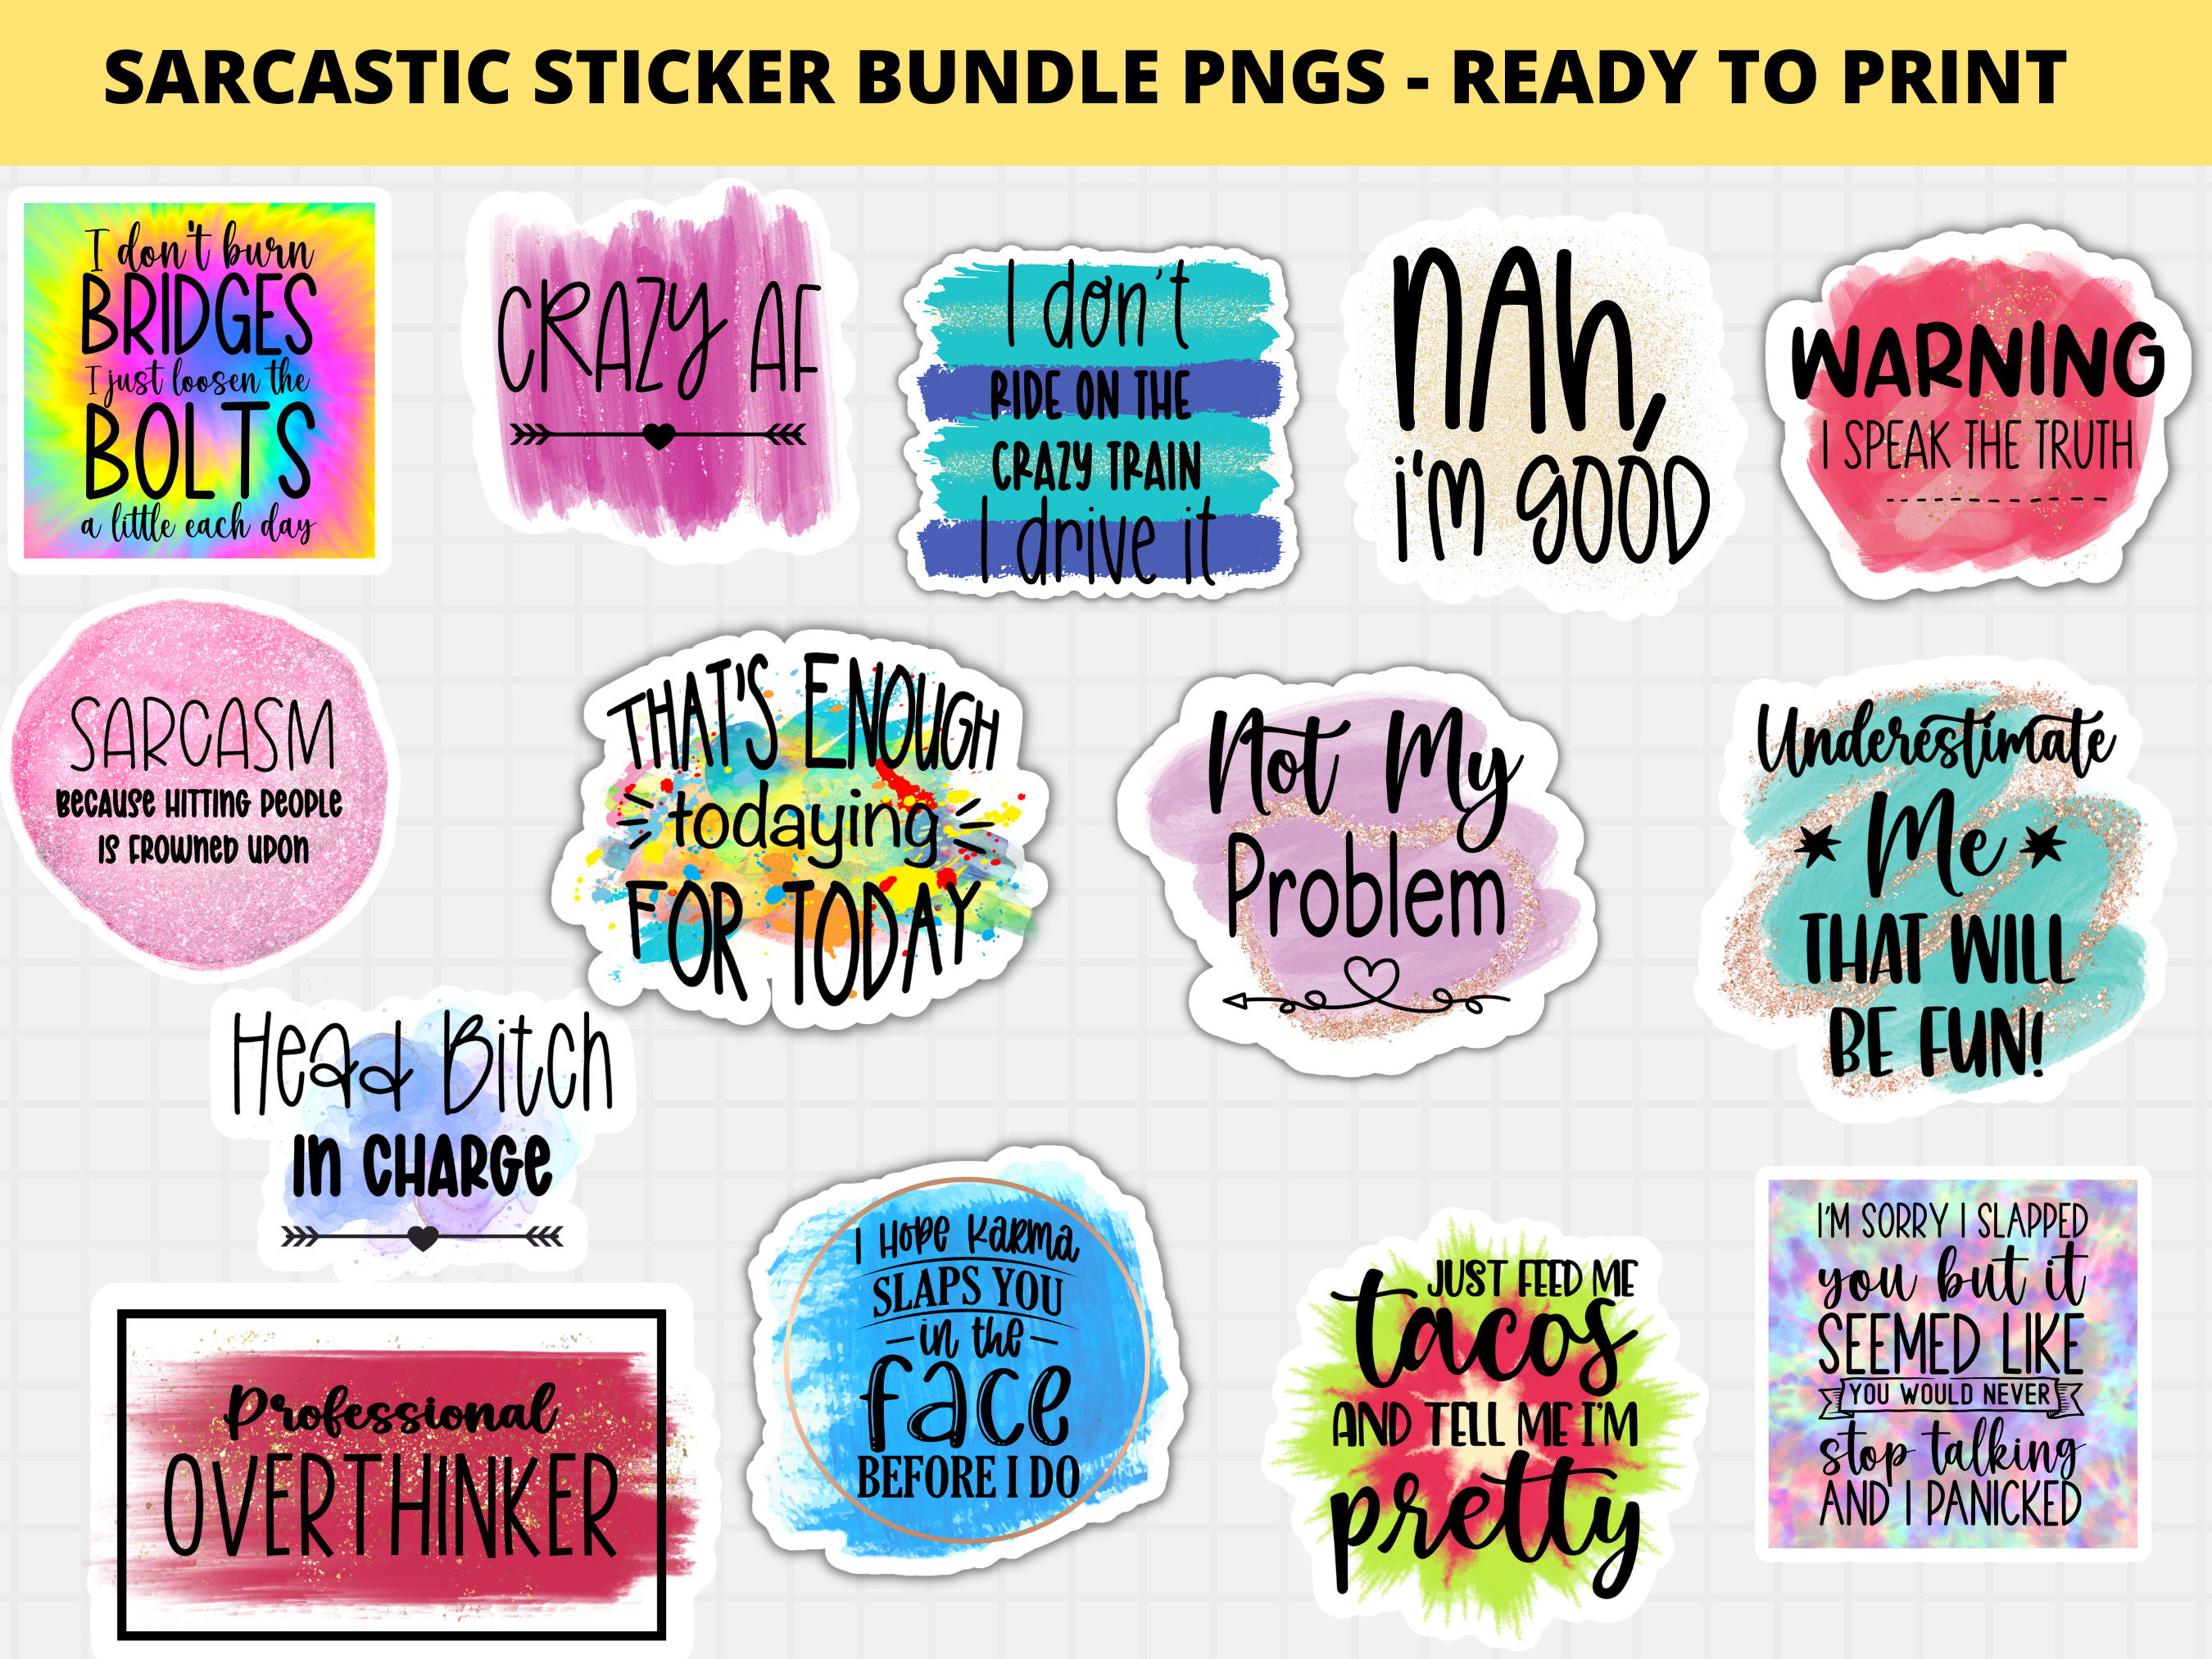 Choose Your Own Sticker Pack - vinyl stickers set, cute pun laptop or water  bottle stickers, bulk stickers, gifts, mix and match stickers